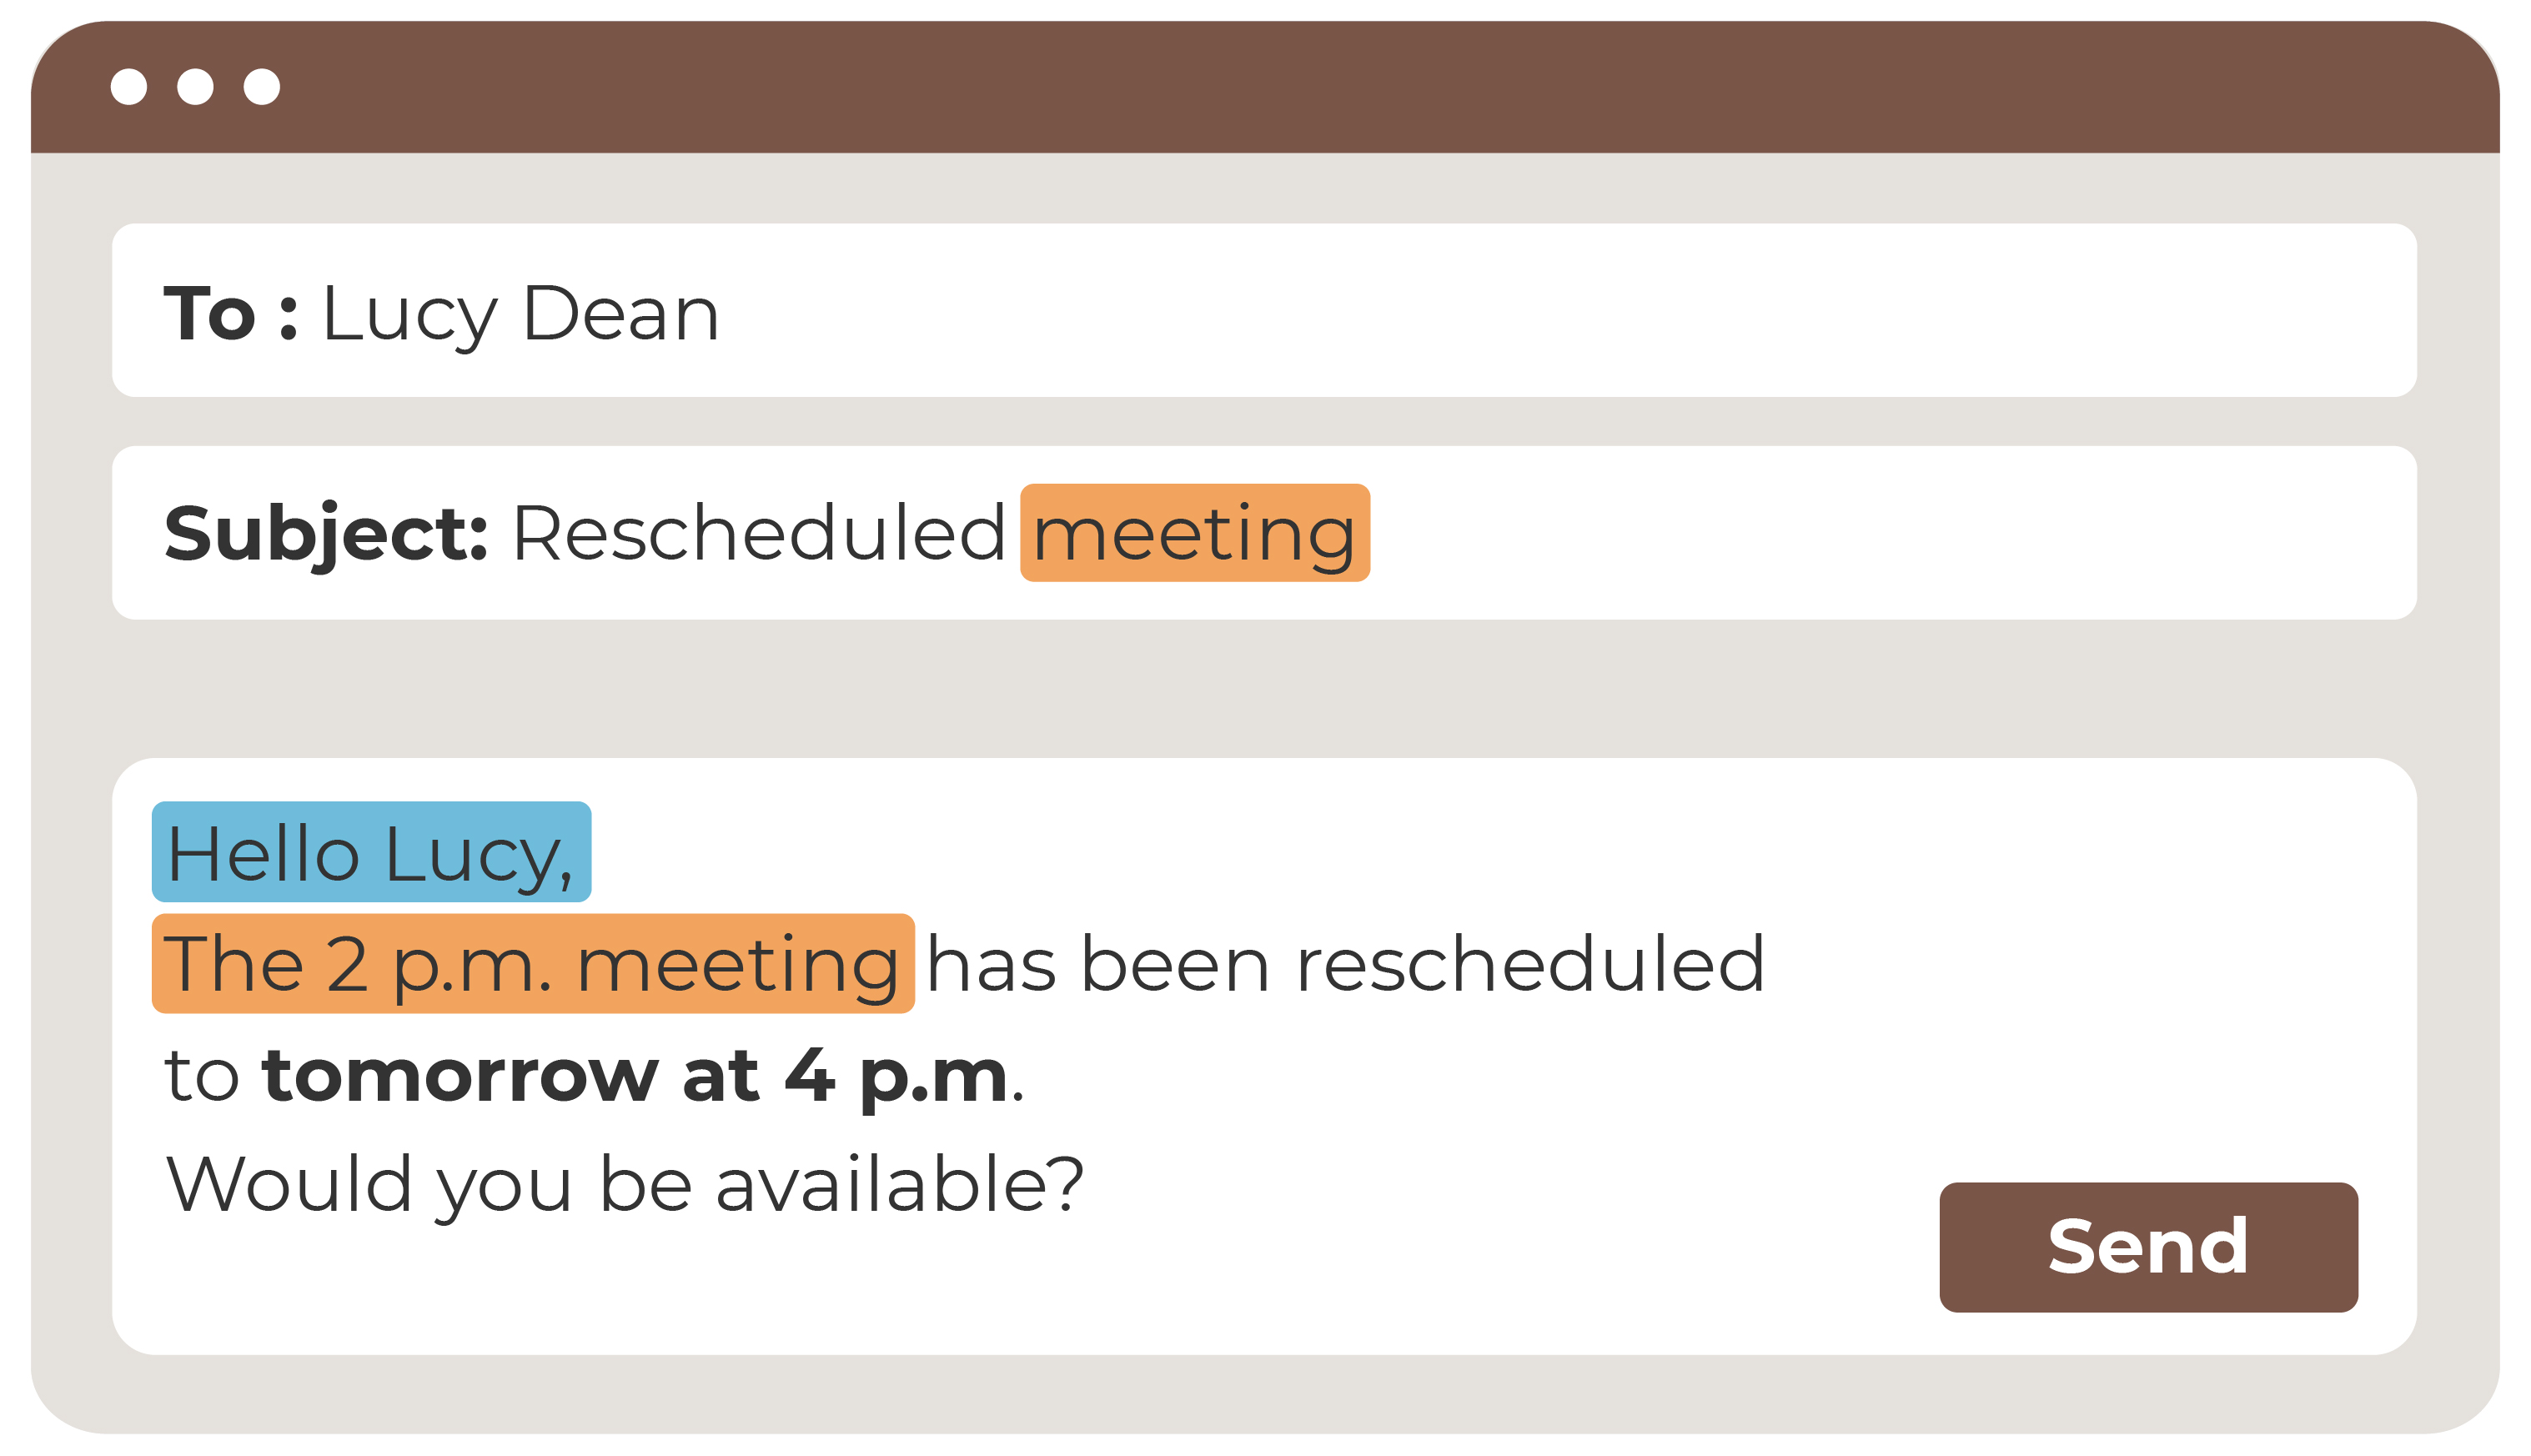 email that reads: To: Lucy Dean Subject: Rescheduled meeting (meeting is highlighted) Hello Lucy, (greeting is highlighted) The 2 p.m meeting (highlighted) has been rescheduled to tomorrow at 4 p.m